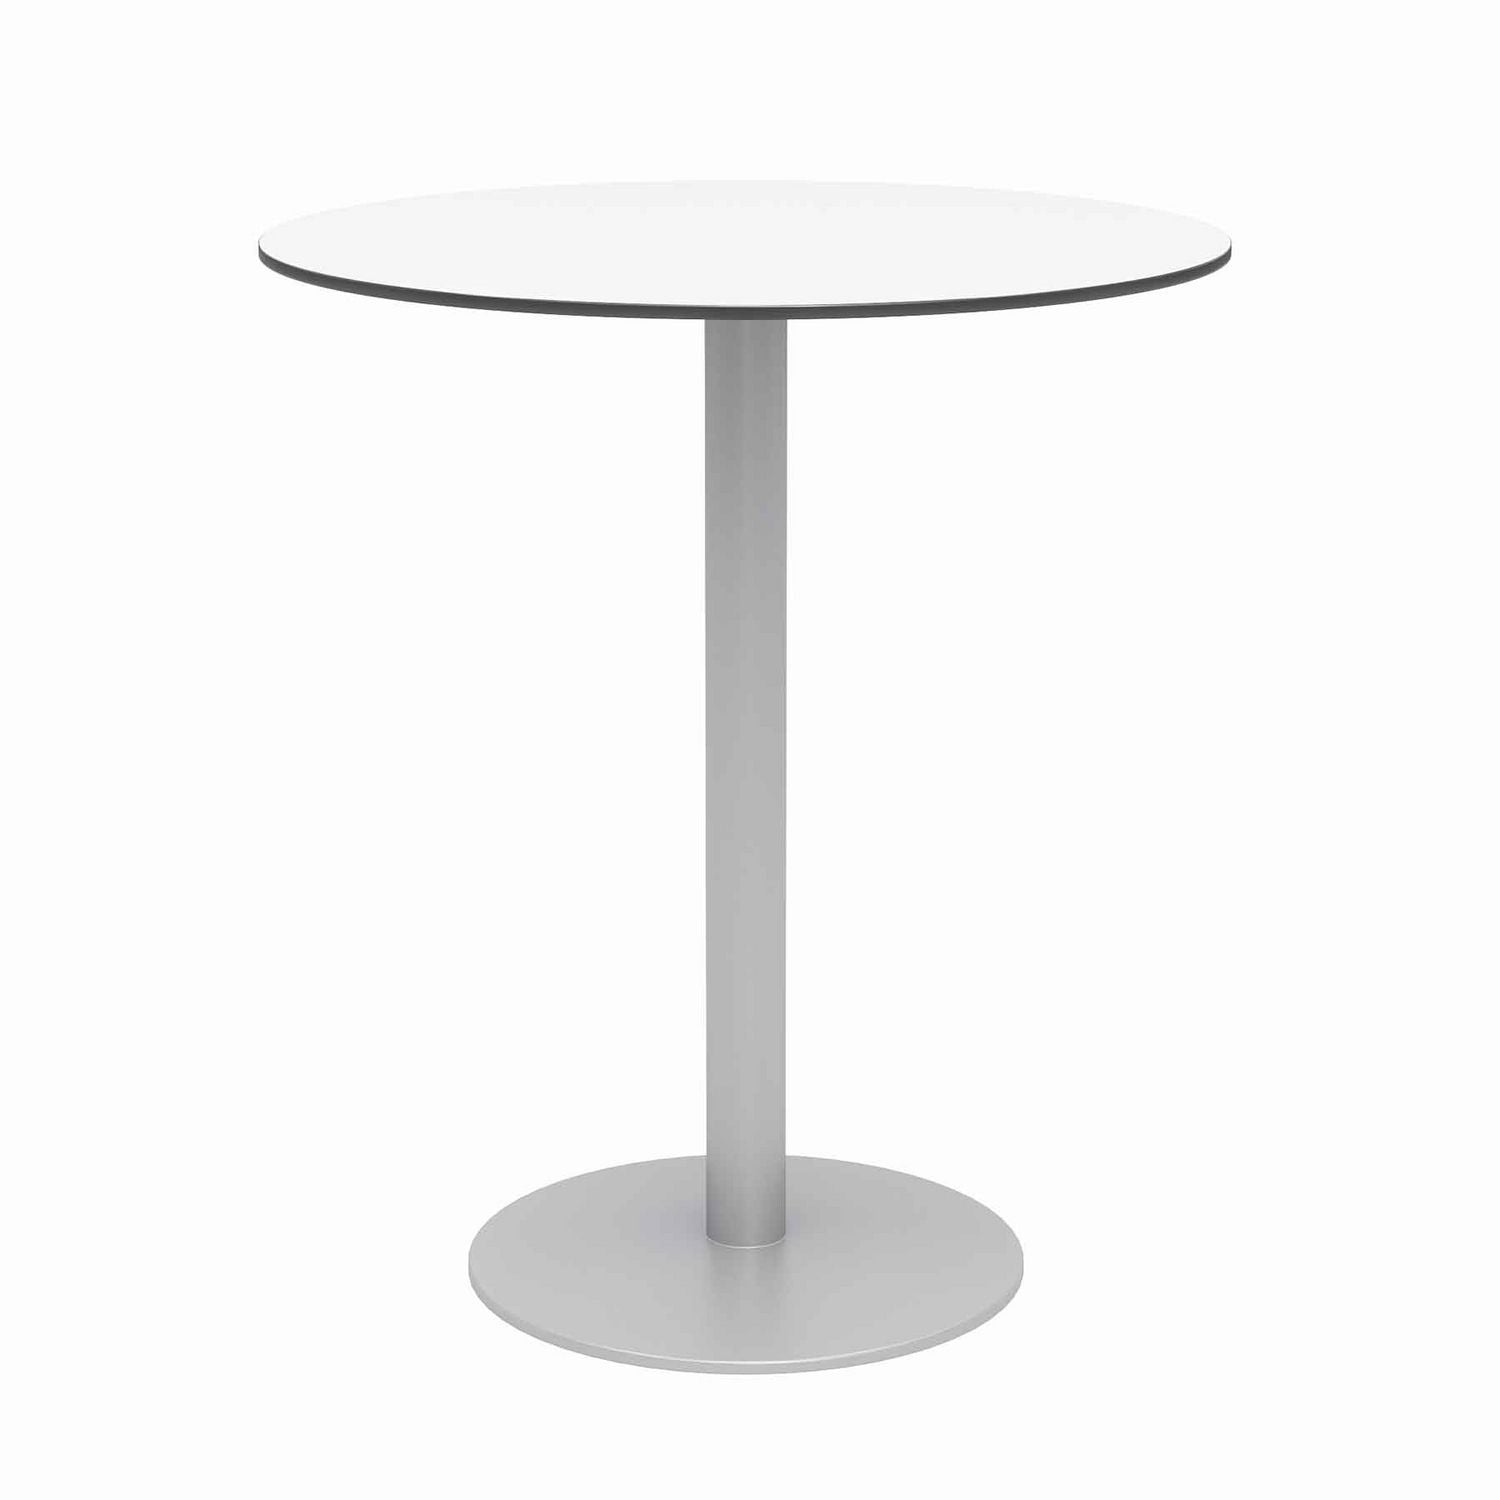 eveleen-outdoor-bistro-patio-table-w-four-gray-powder-coated-polymer-barstools-round-41h-white-ships-in-4-6-bus-days_kfi840031918512 - 2